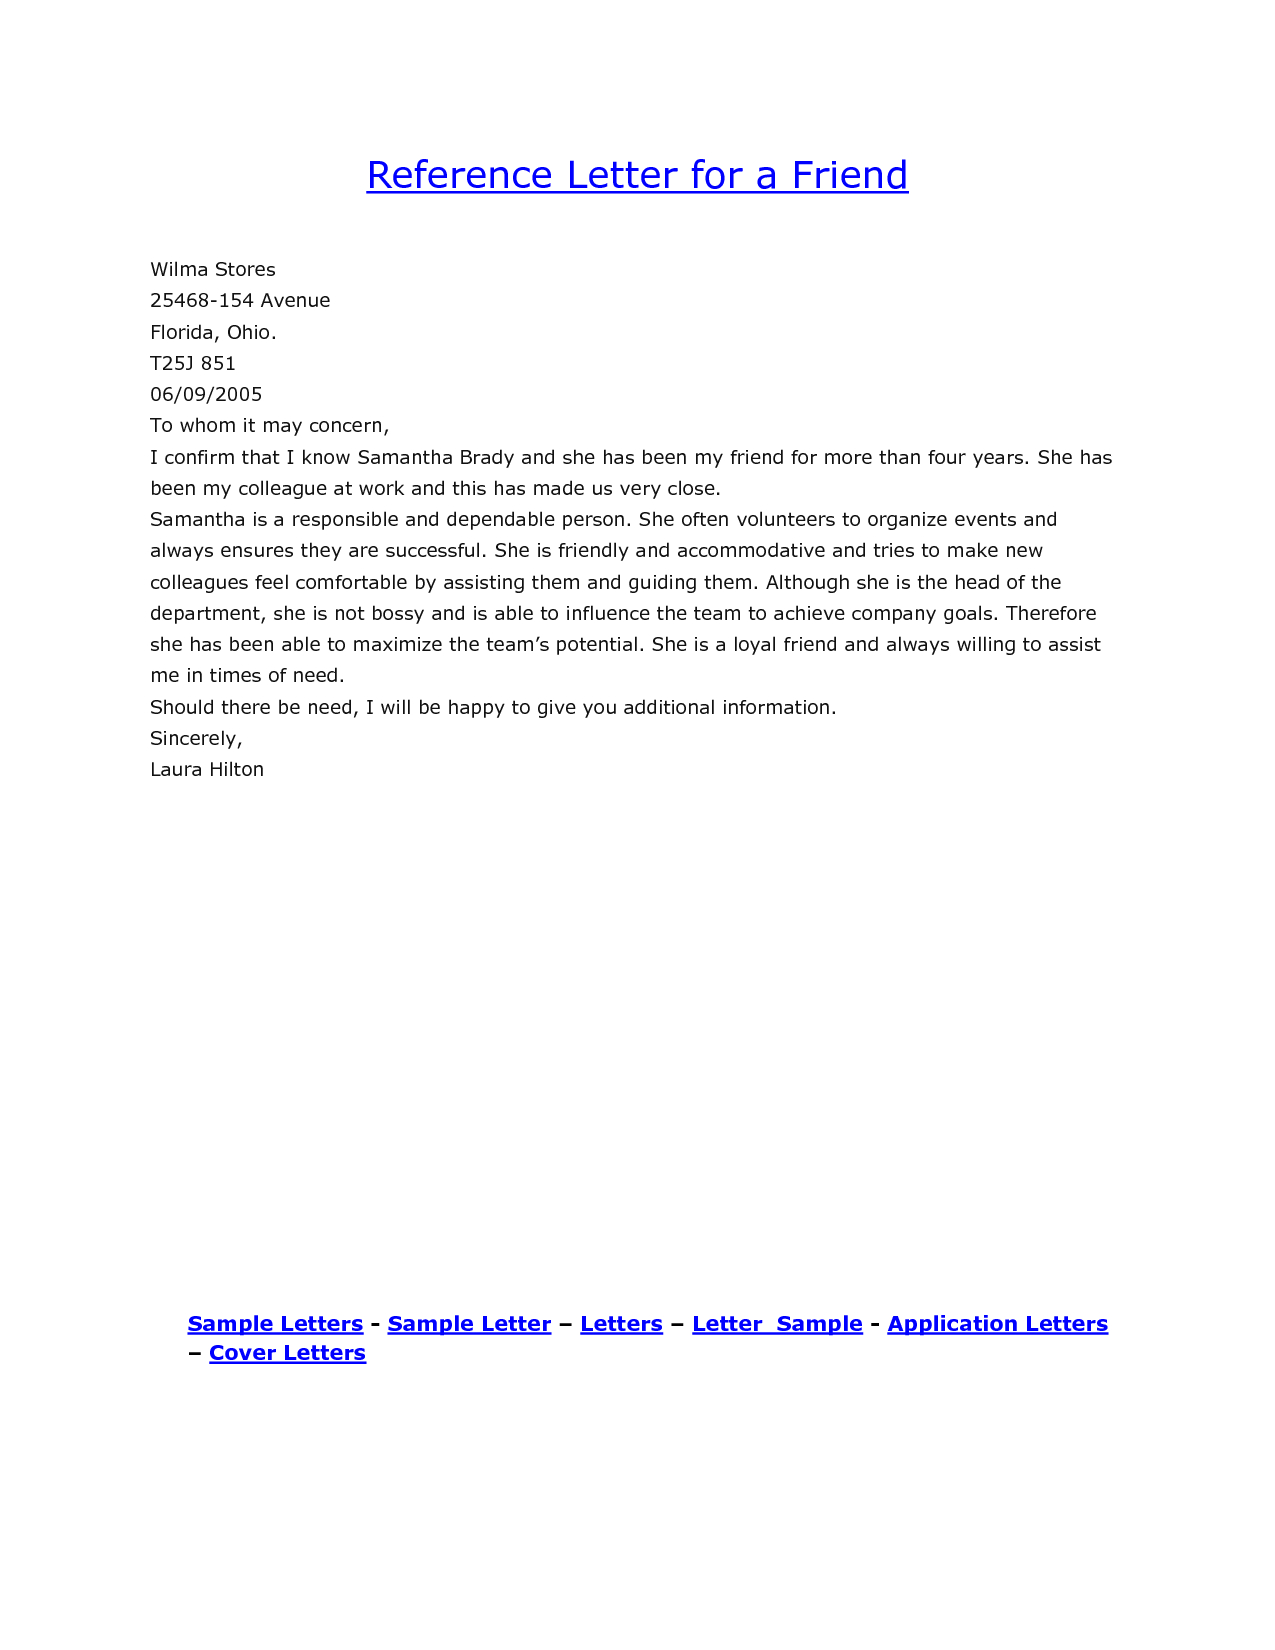 Good Moral Character Family Friend Letter Of Recommendation For A 